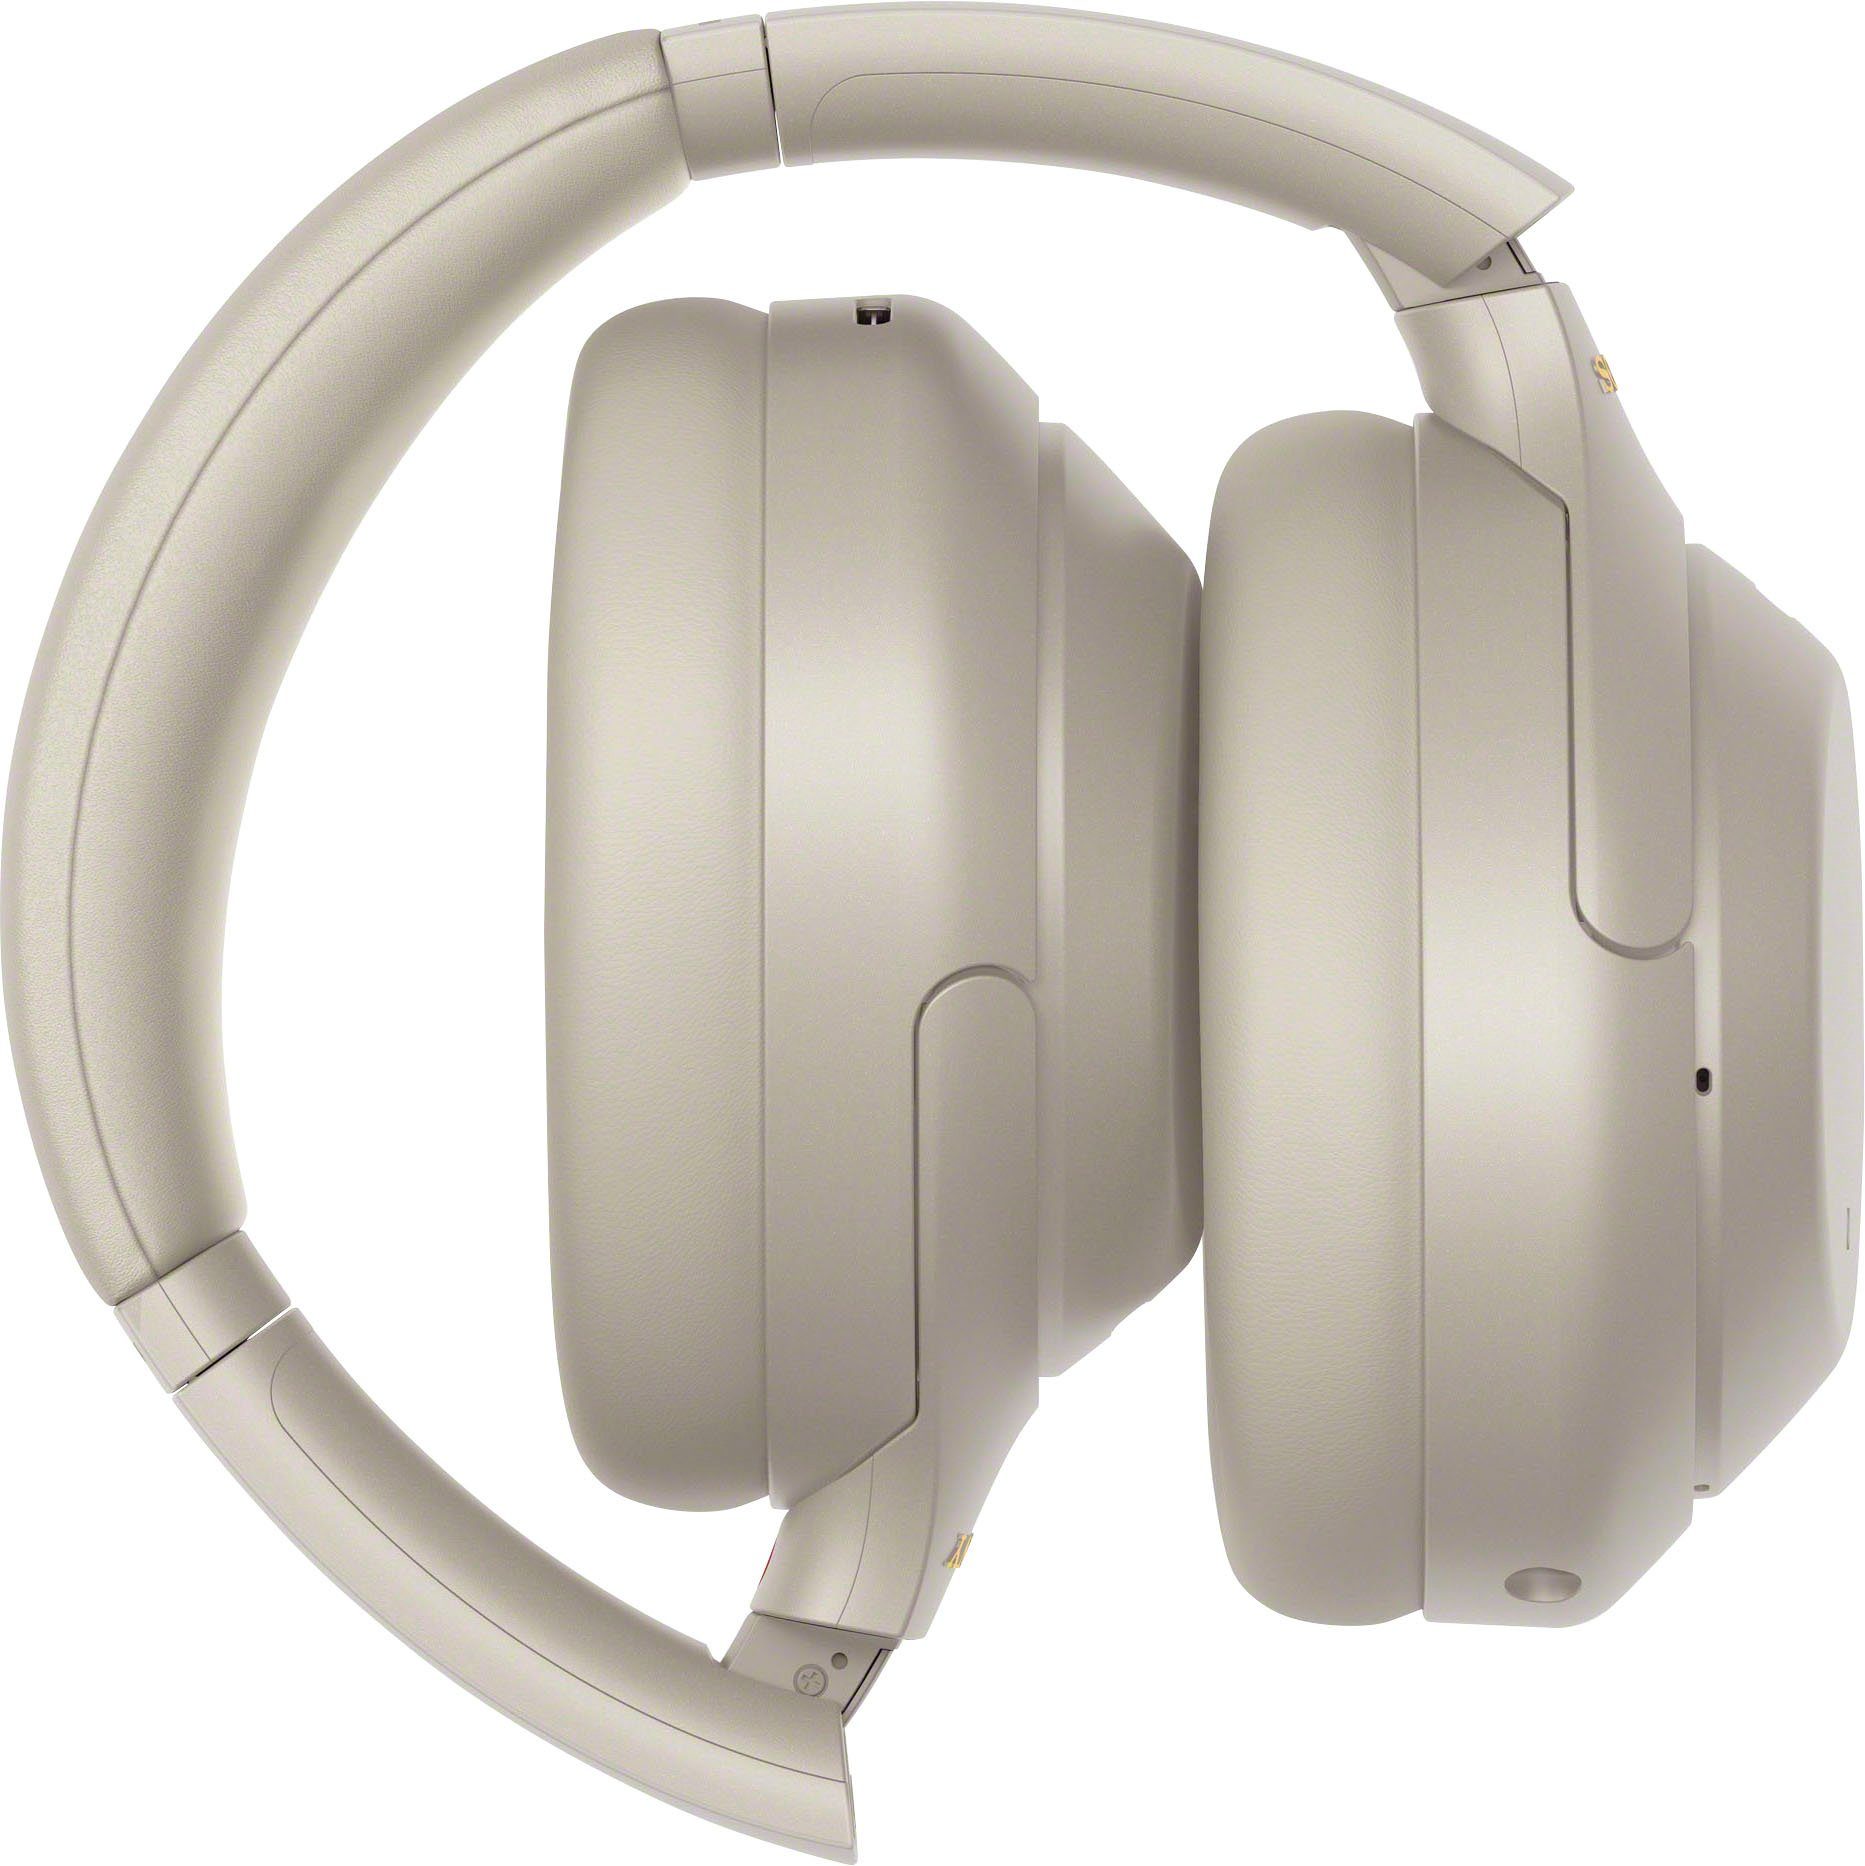 Sony via Silber NFC, Over-Ear-Kopfhörer kabelloser One-Touch WH-1000XM4 Schnellladefunktion) Sensor, Touch NFC, (Noise-Cancelling, Bluetooth, Verbindung